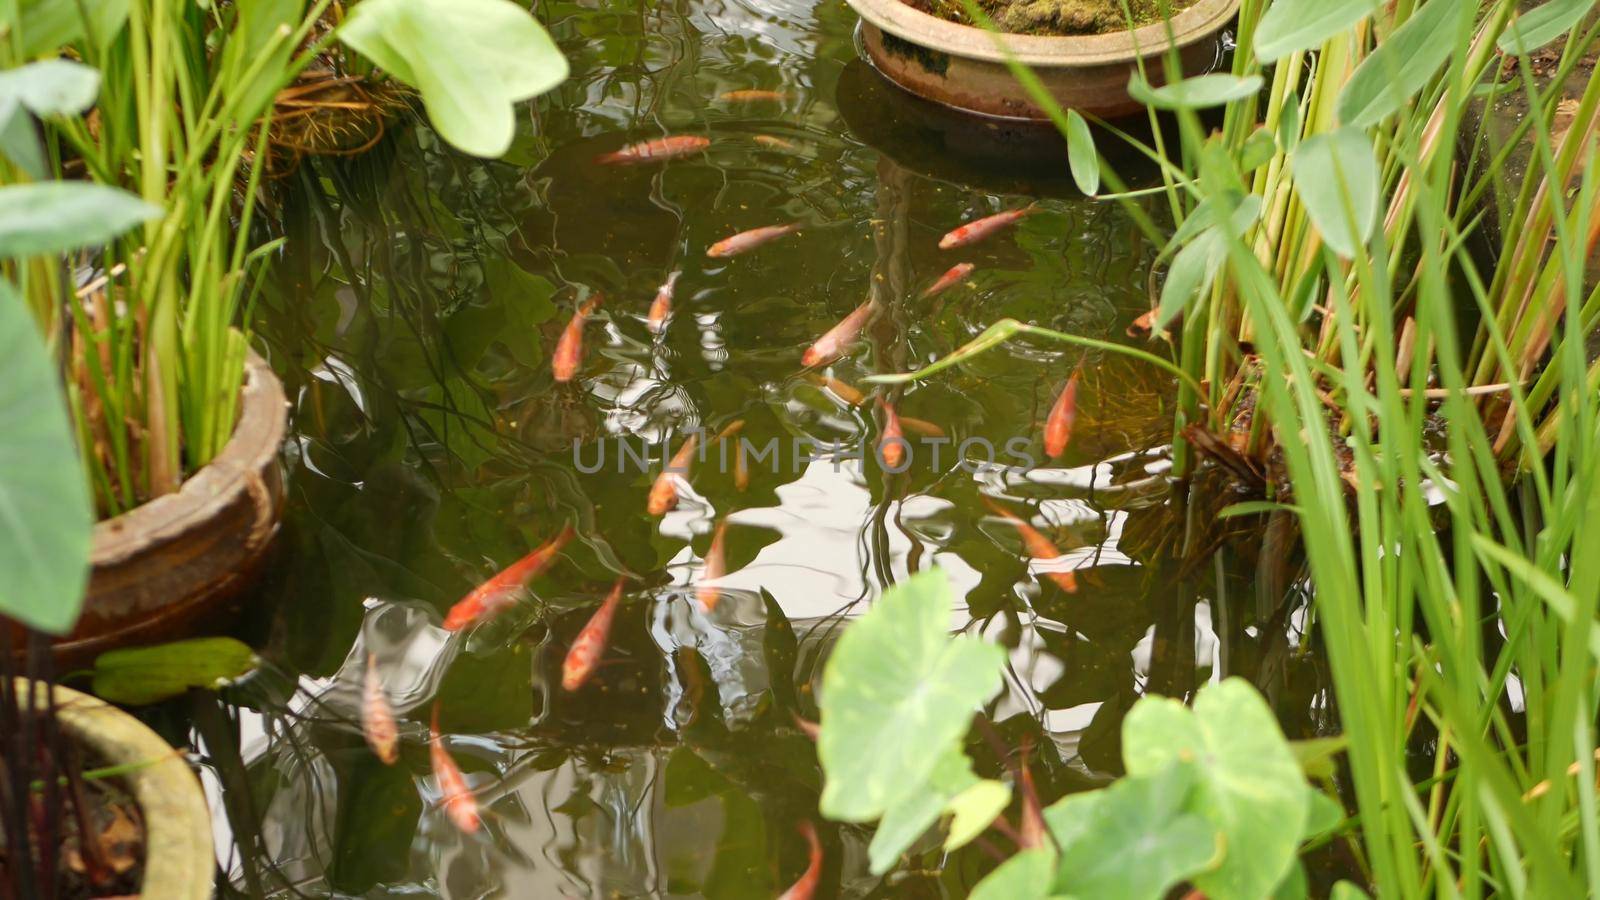 Natural greenery background. Vibrant Colorful Japanese Koi Carp fish swimming in traditional garden lake or pond. Chinese Fancy Carps under water surface. Oriental symbols of fortune and good luck. by DogoraSun